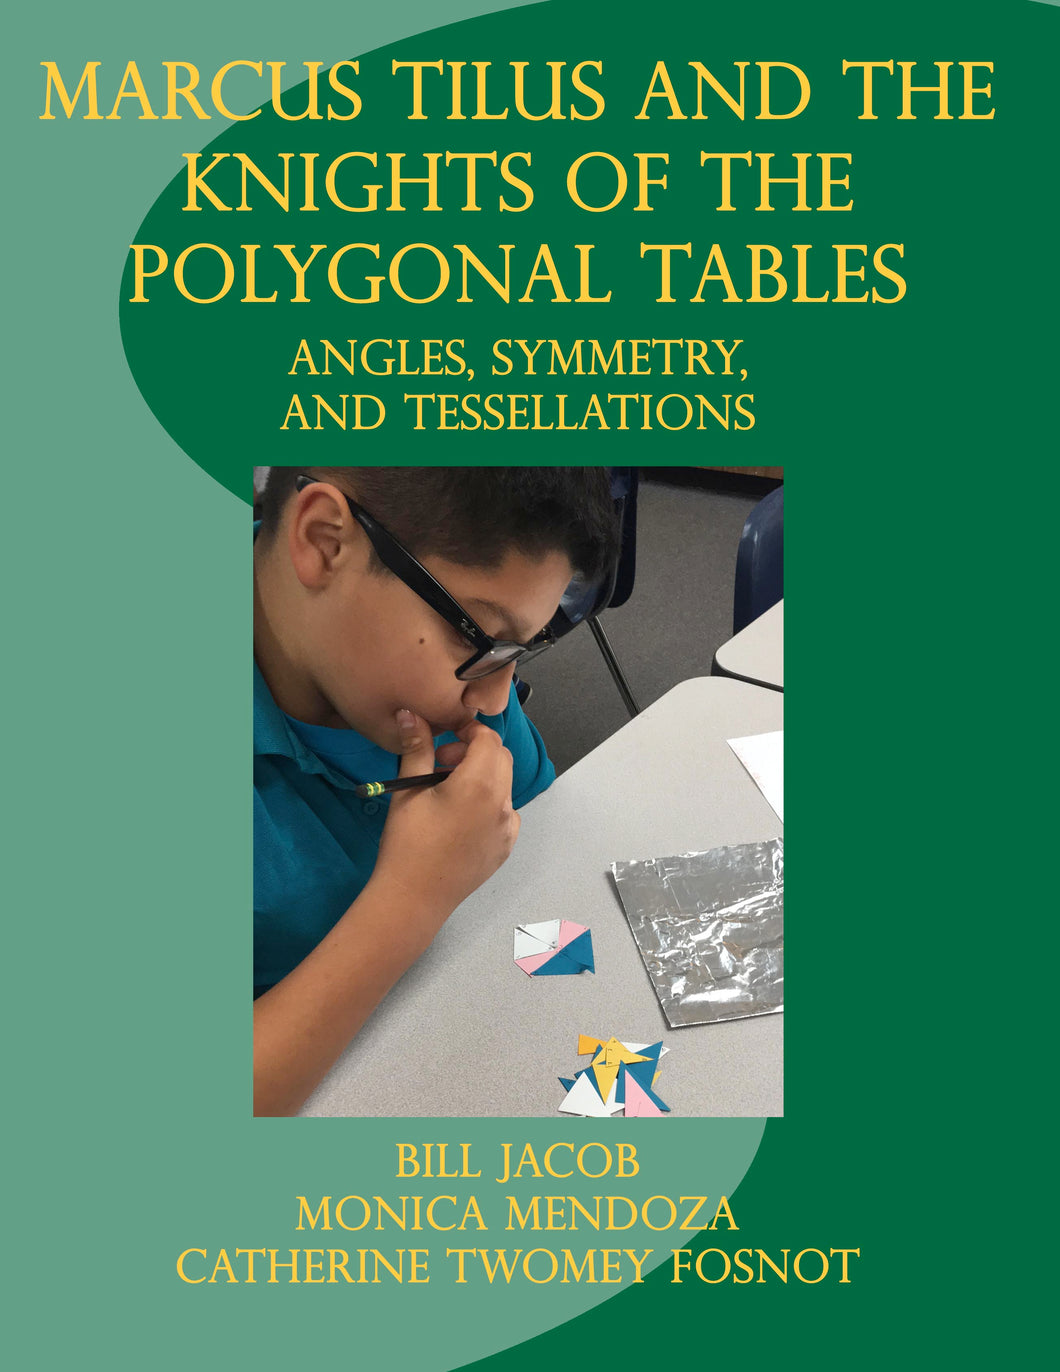 Marcus Tilus and the Knights of the Polygonal Tables - Angles, Symmetry and Tesselations